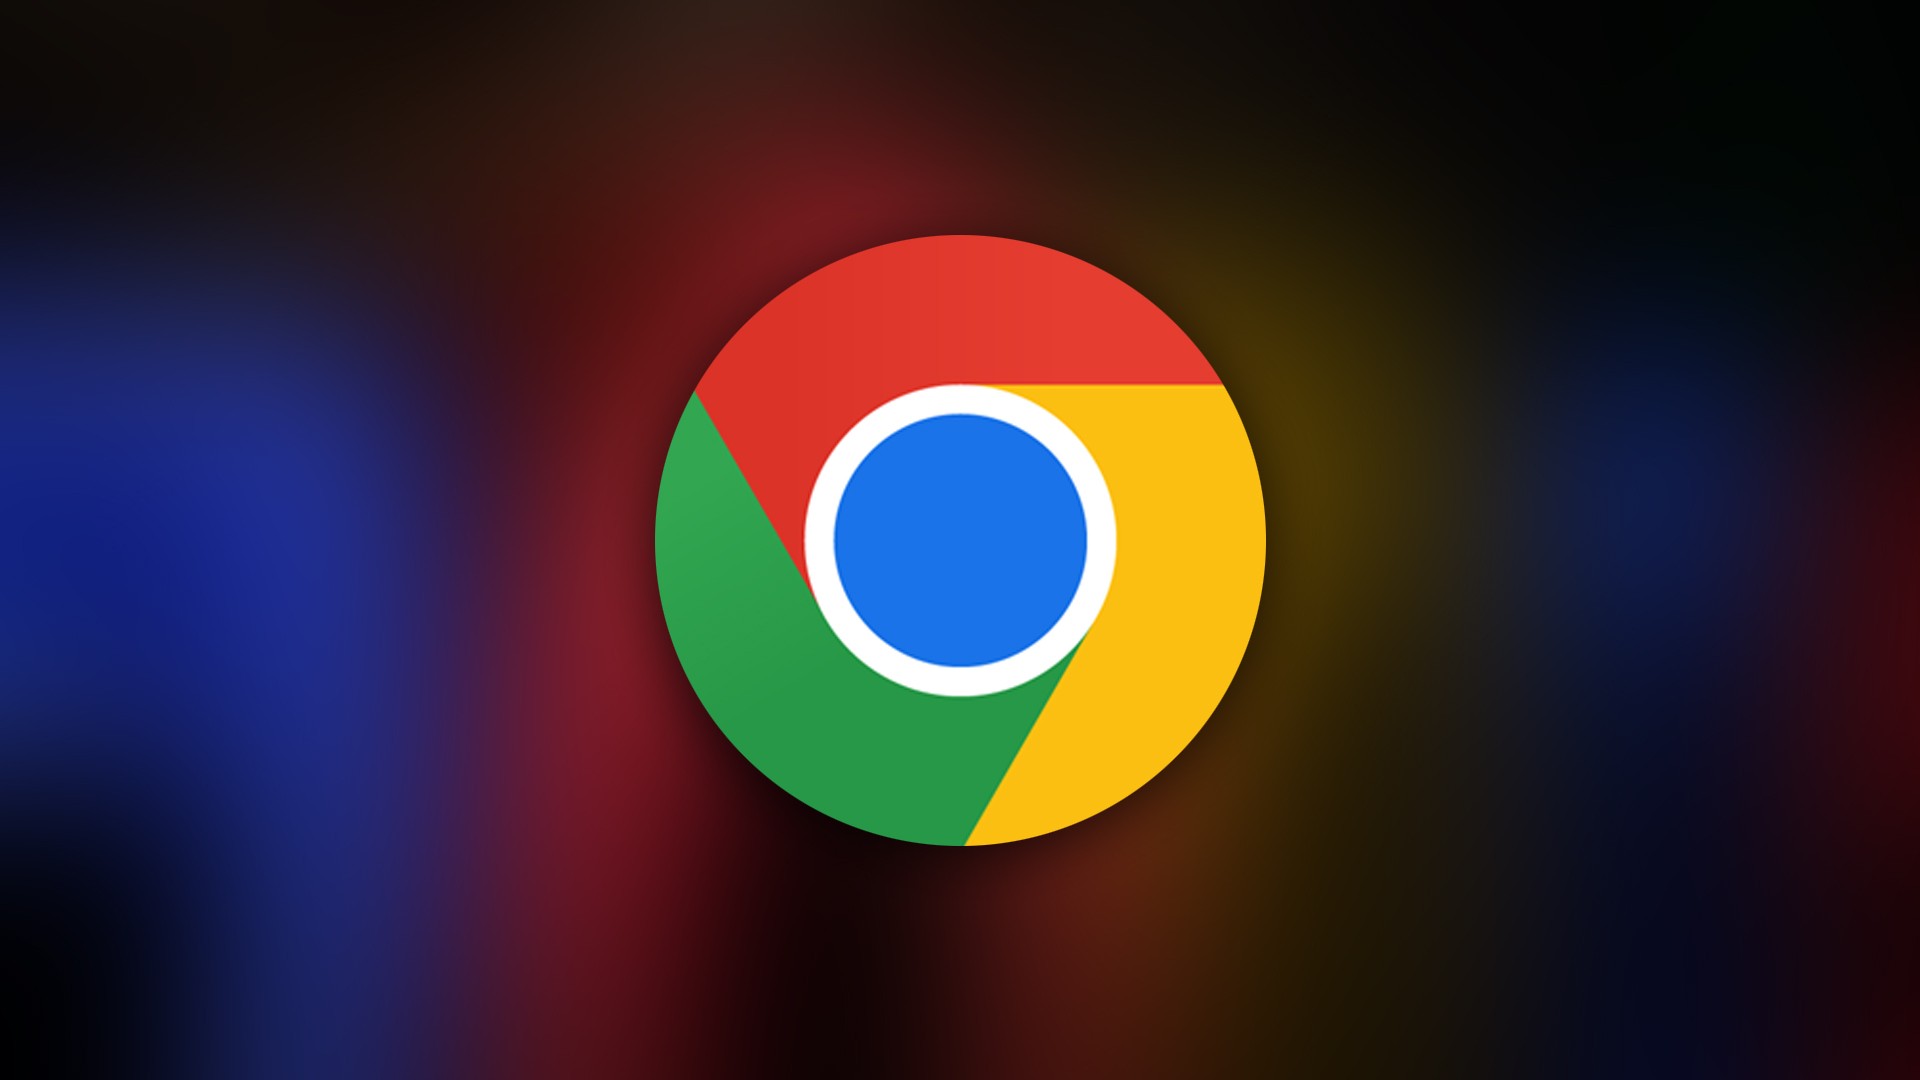 Google Chrome for Android is receiving a new interface soon